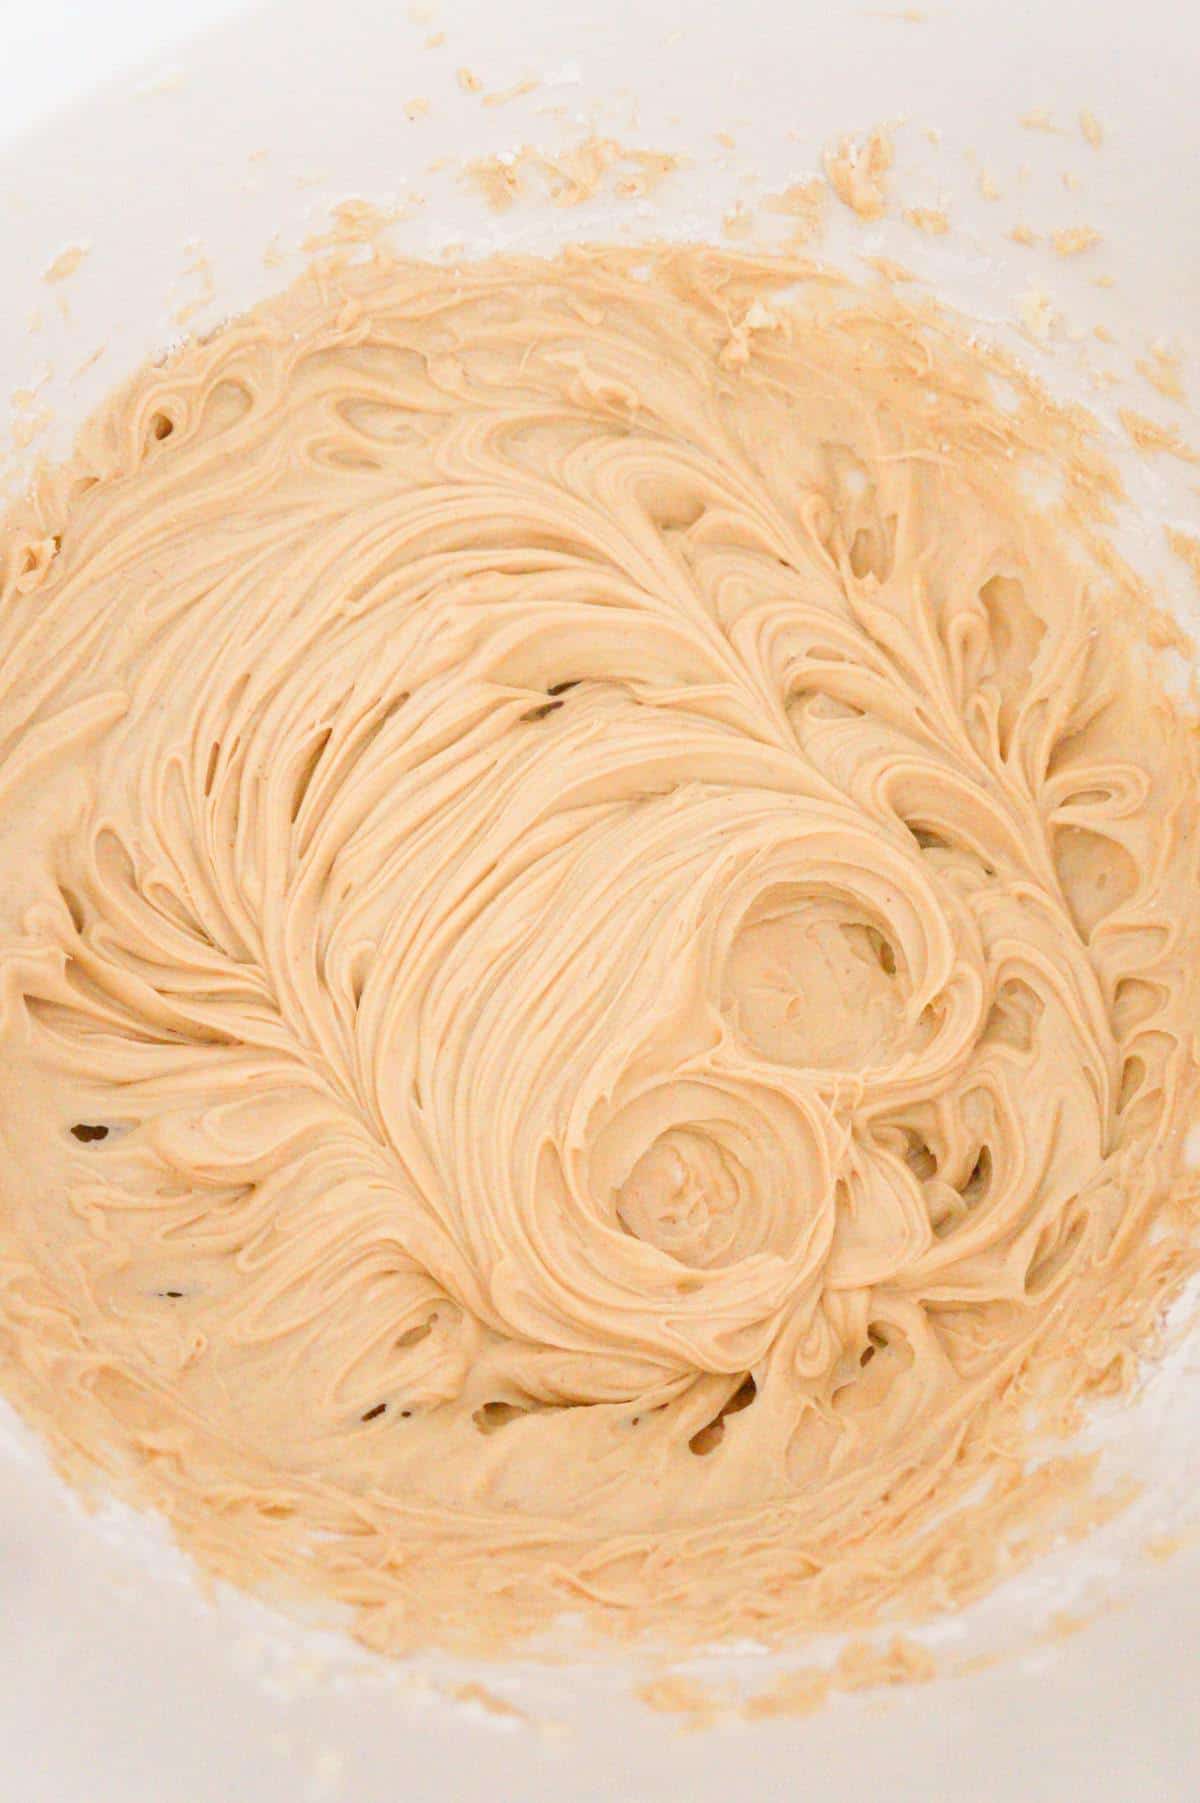 creamy butter and peanut butter mixture in a mixing bowl